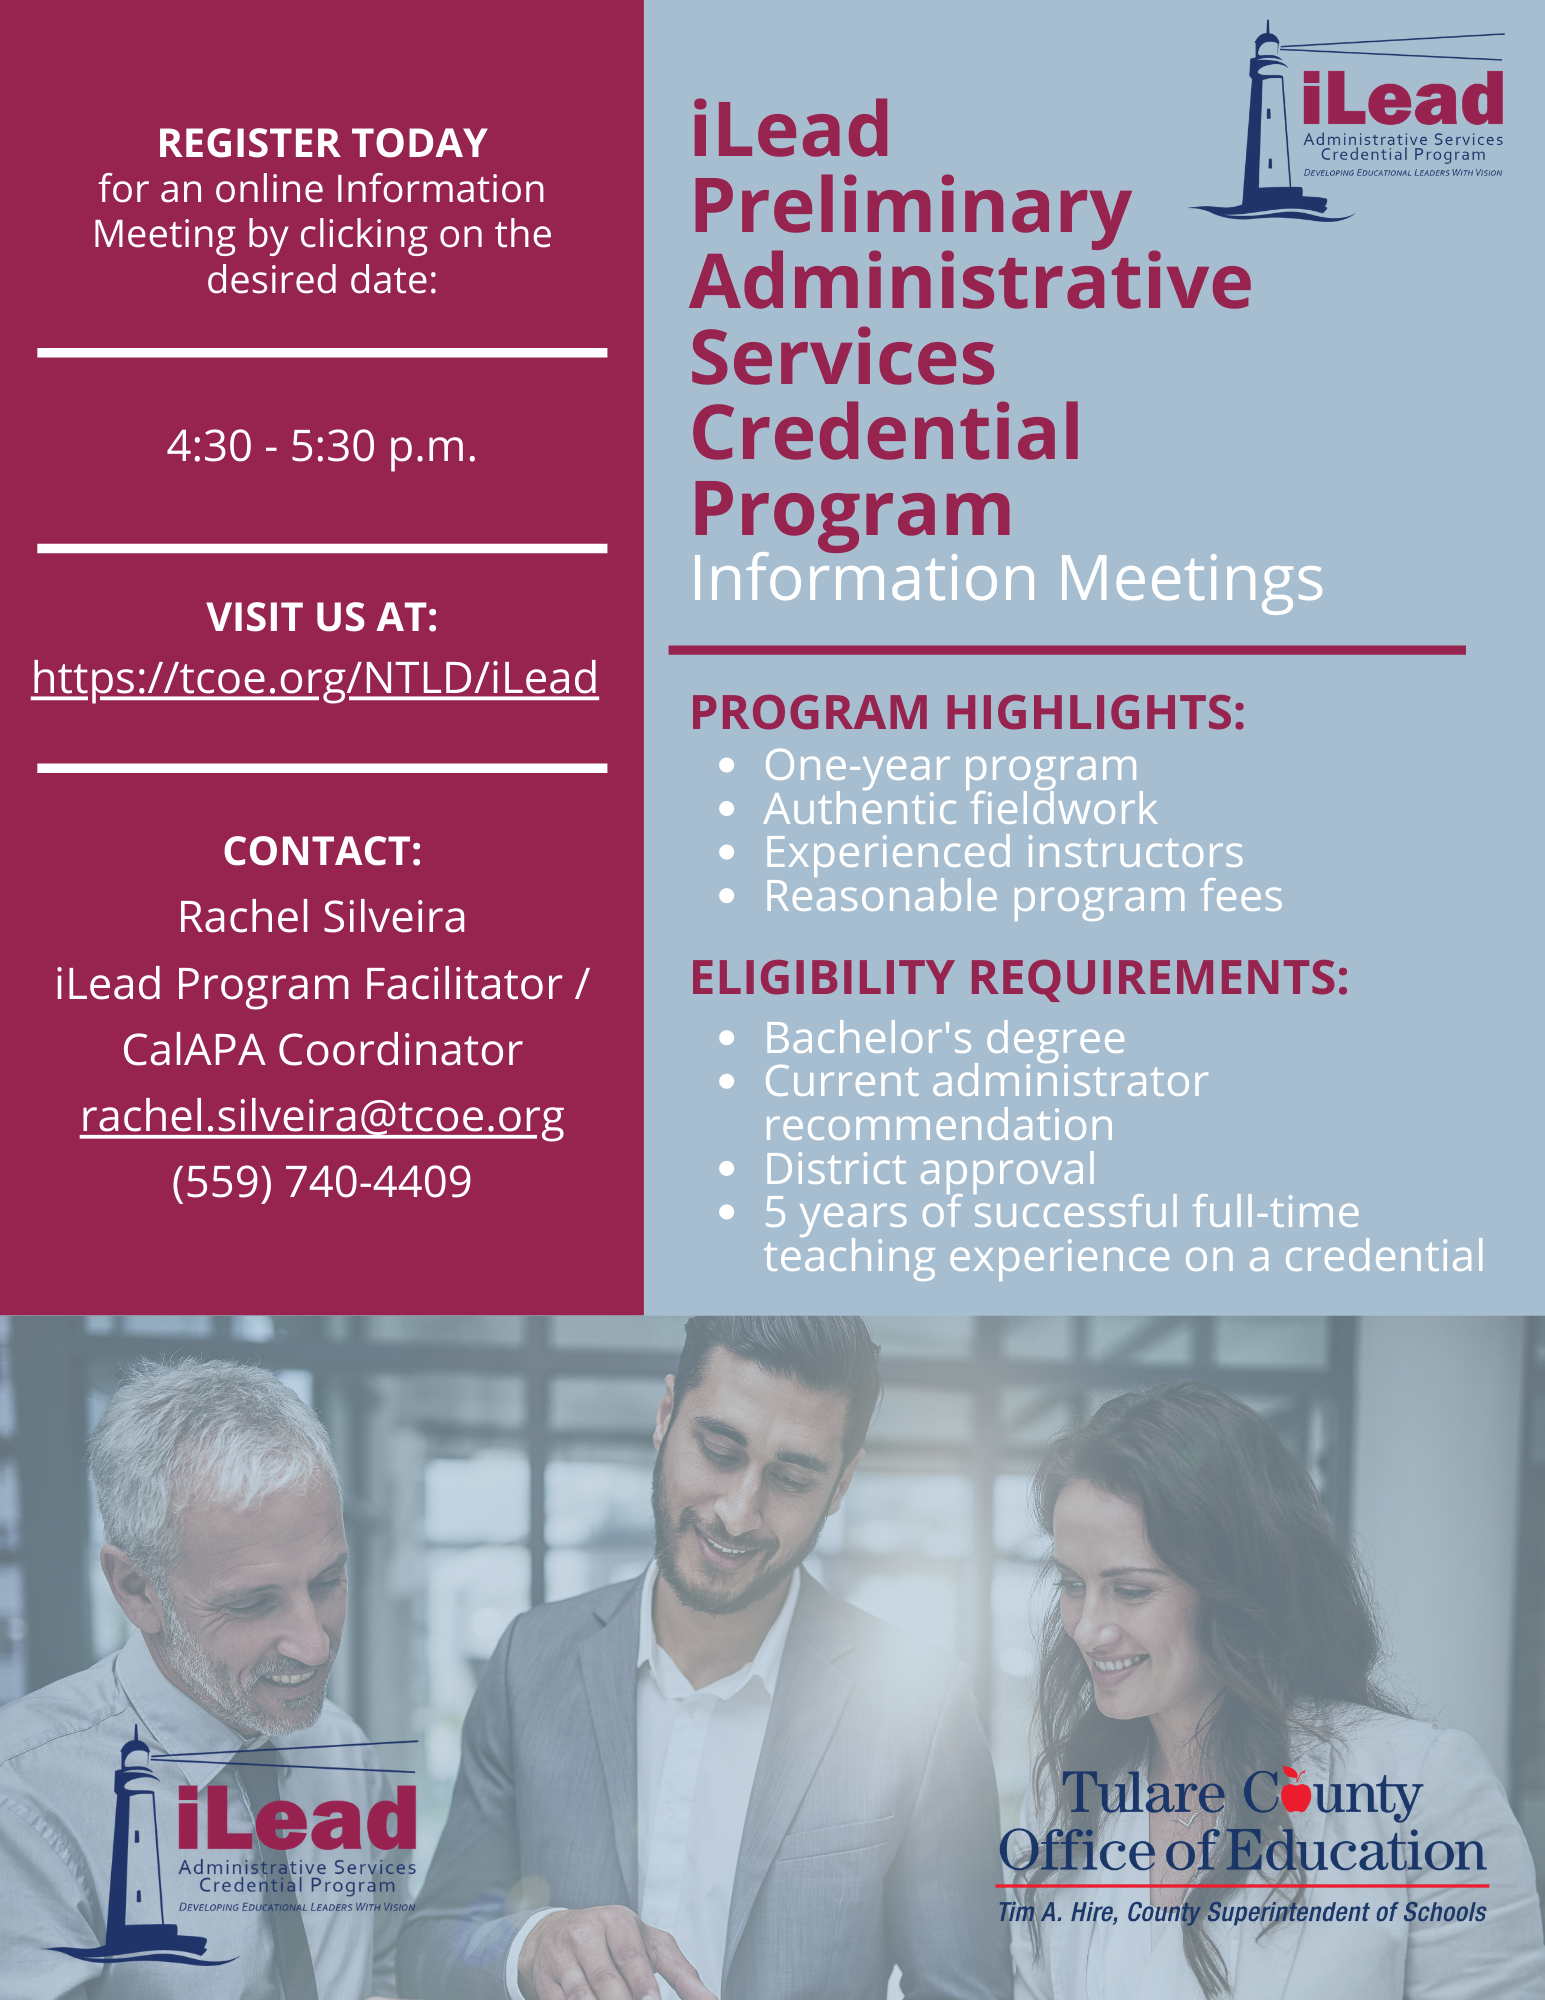 Link to register for an iLead Prelminary Administrative Services Credential Program Information Meeting.